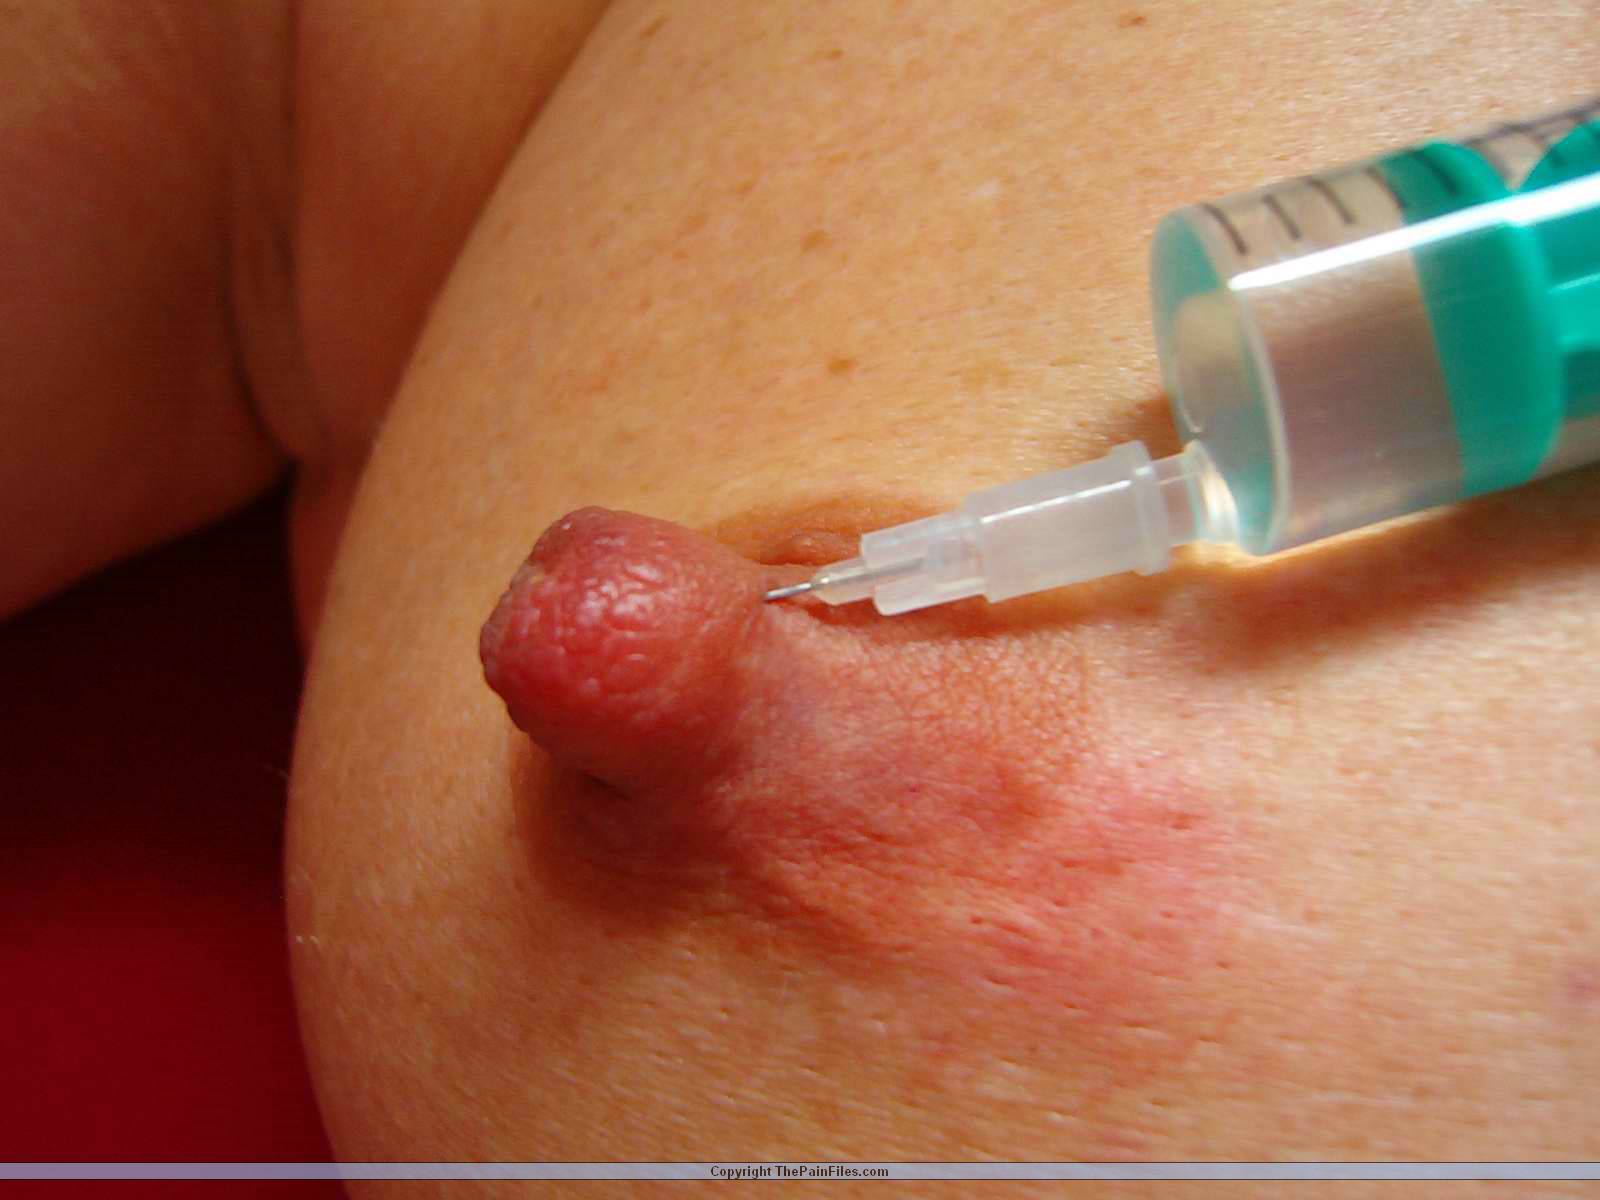 Bdsm girl getting painful saline breast injections